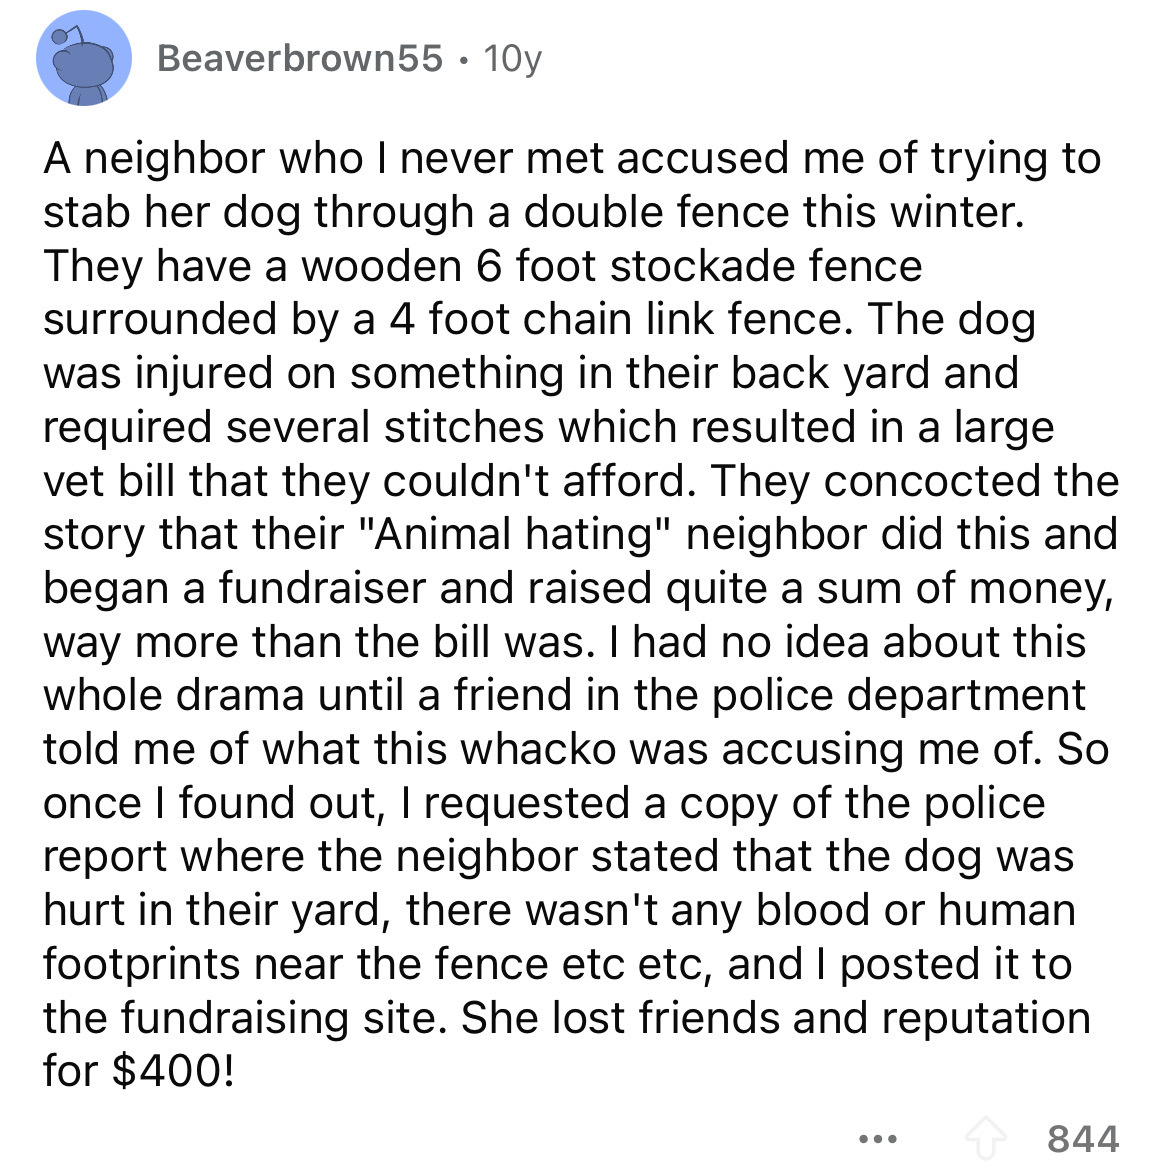 document - Beaverbrown55 10y A neighbor who I never met accused me of trying to stab her dog through a double fence this winter. They have a wooden 6 foot stockade fence surrounded by a 4 foot chain link fence. The dog was injured on something in their ba